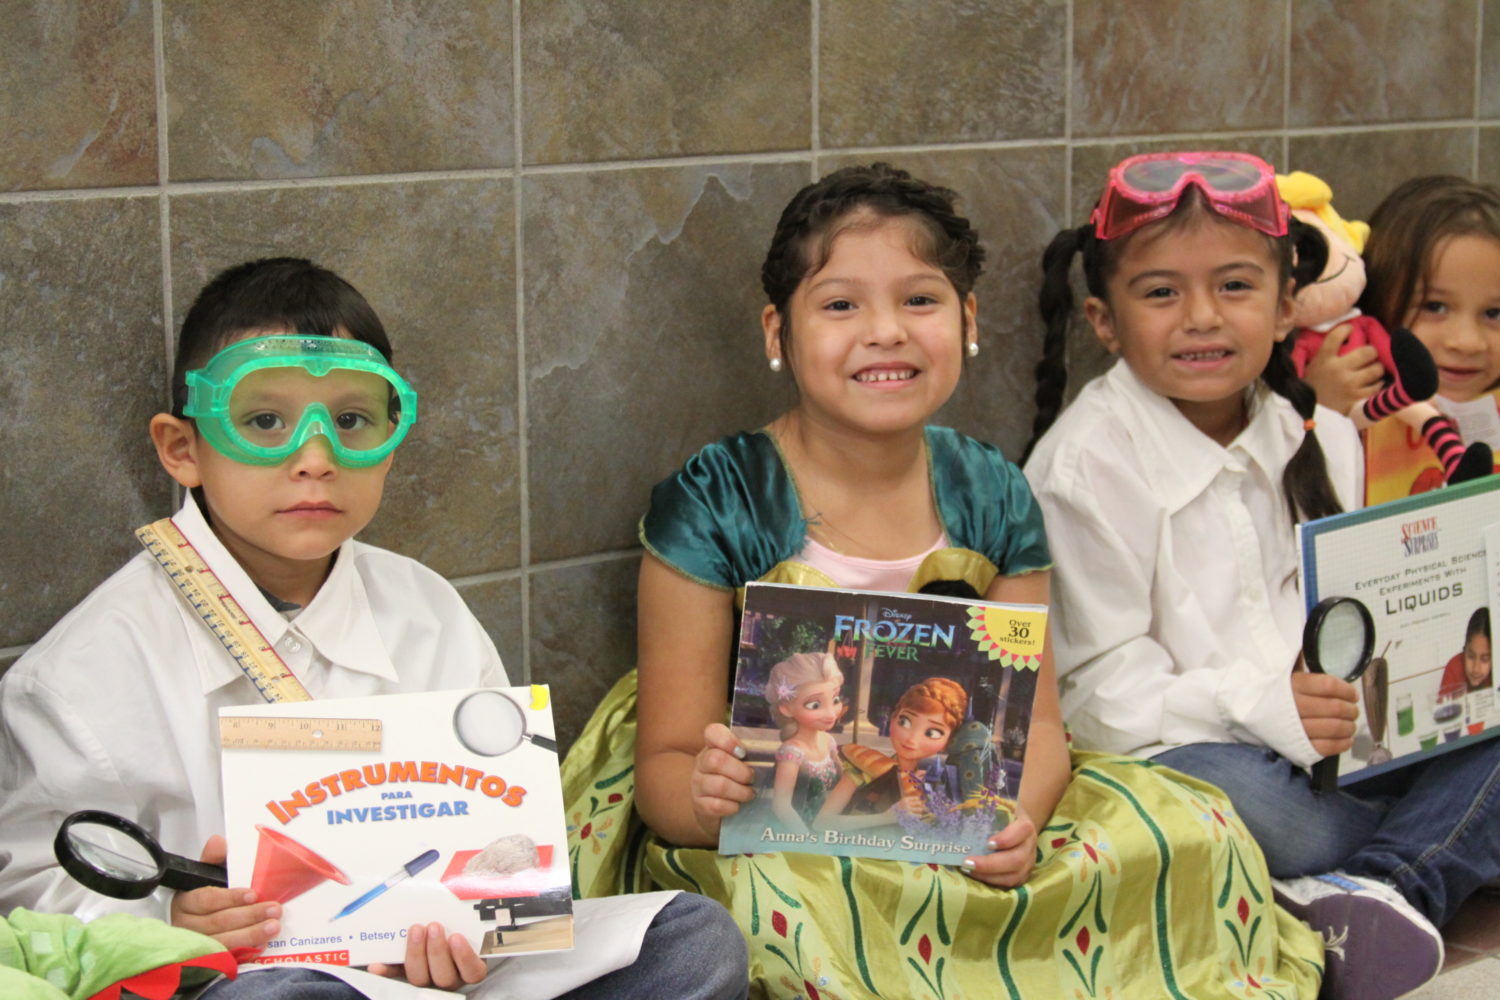 Anderson Elementary students participated in the School Book Parade.